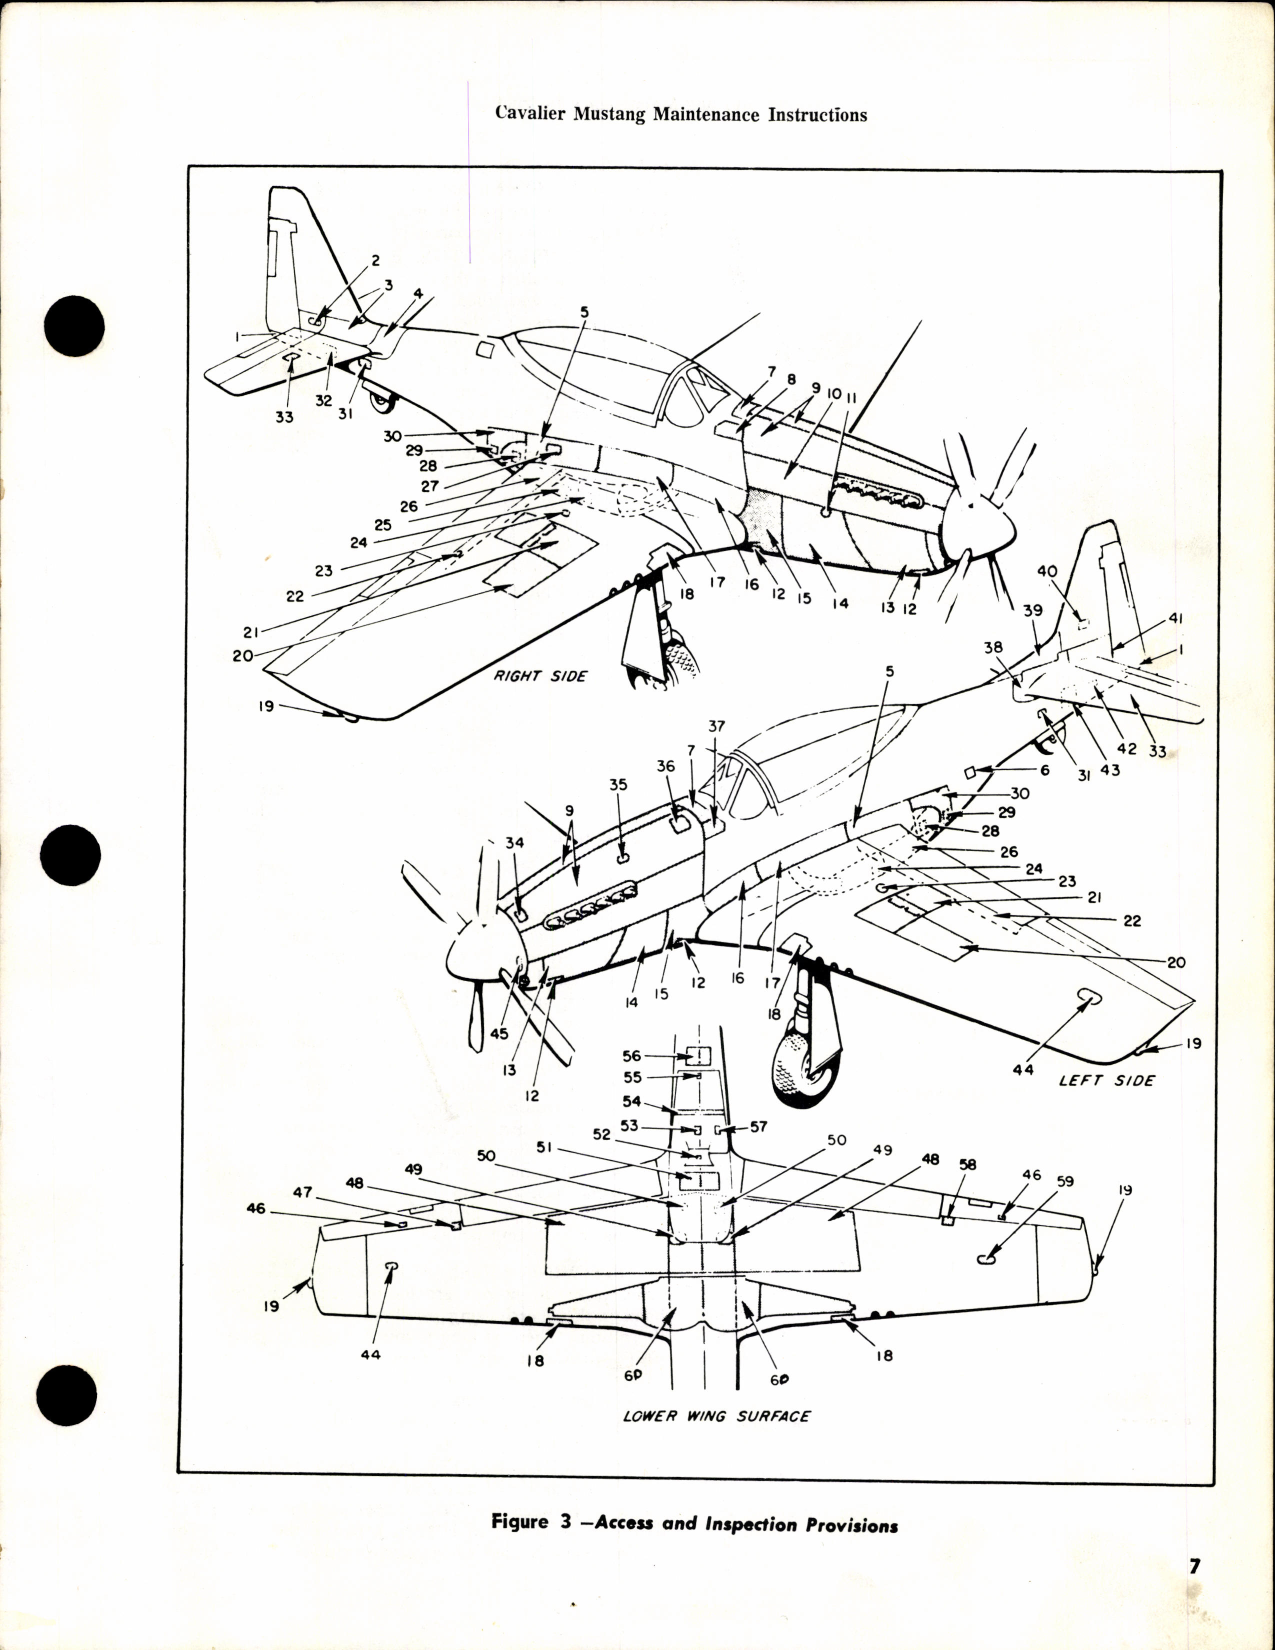 Sample page 11 from AirCorps Library document: Maintenance Instructions - Cavalier Mustang - F-51D